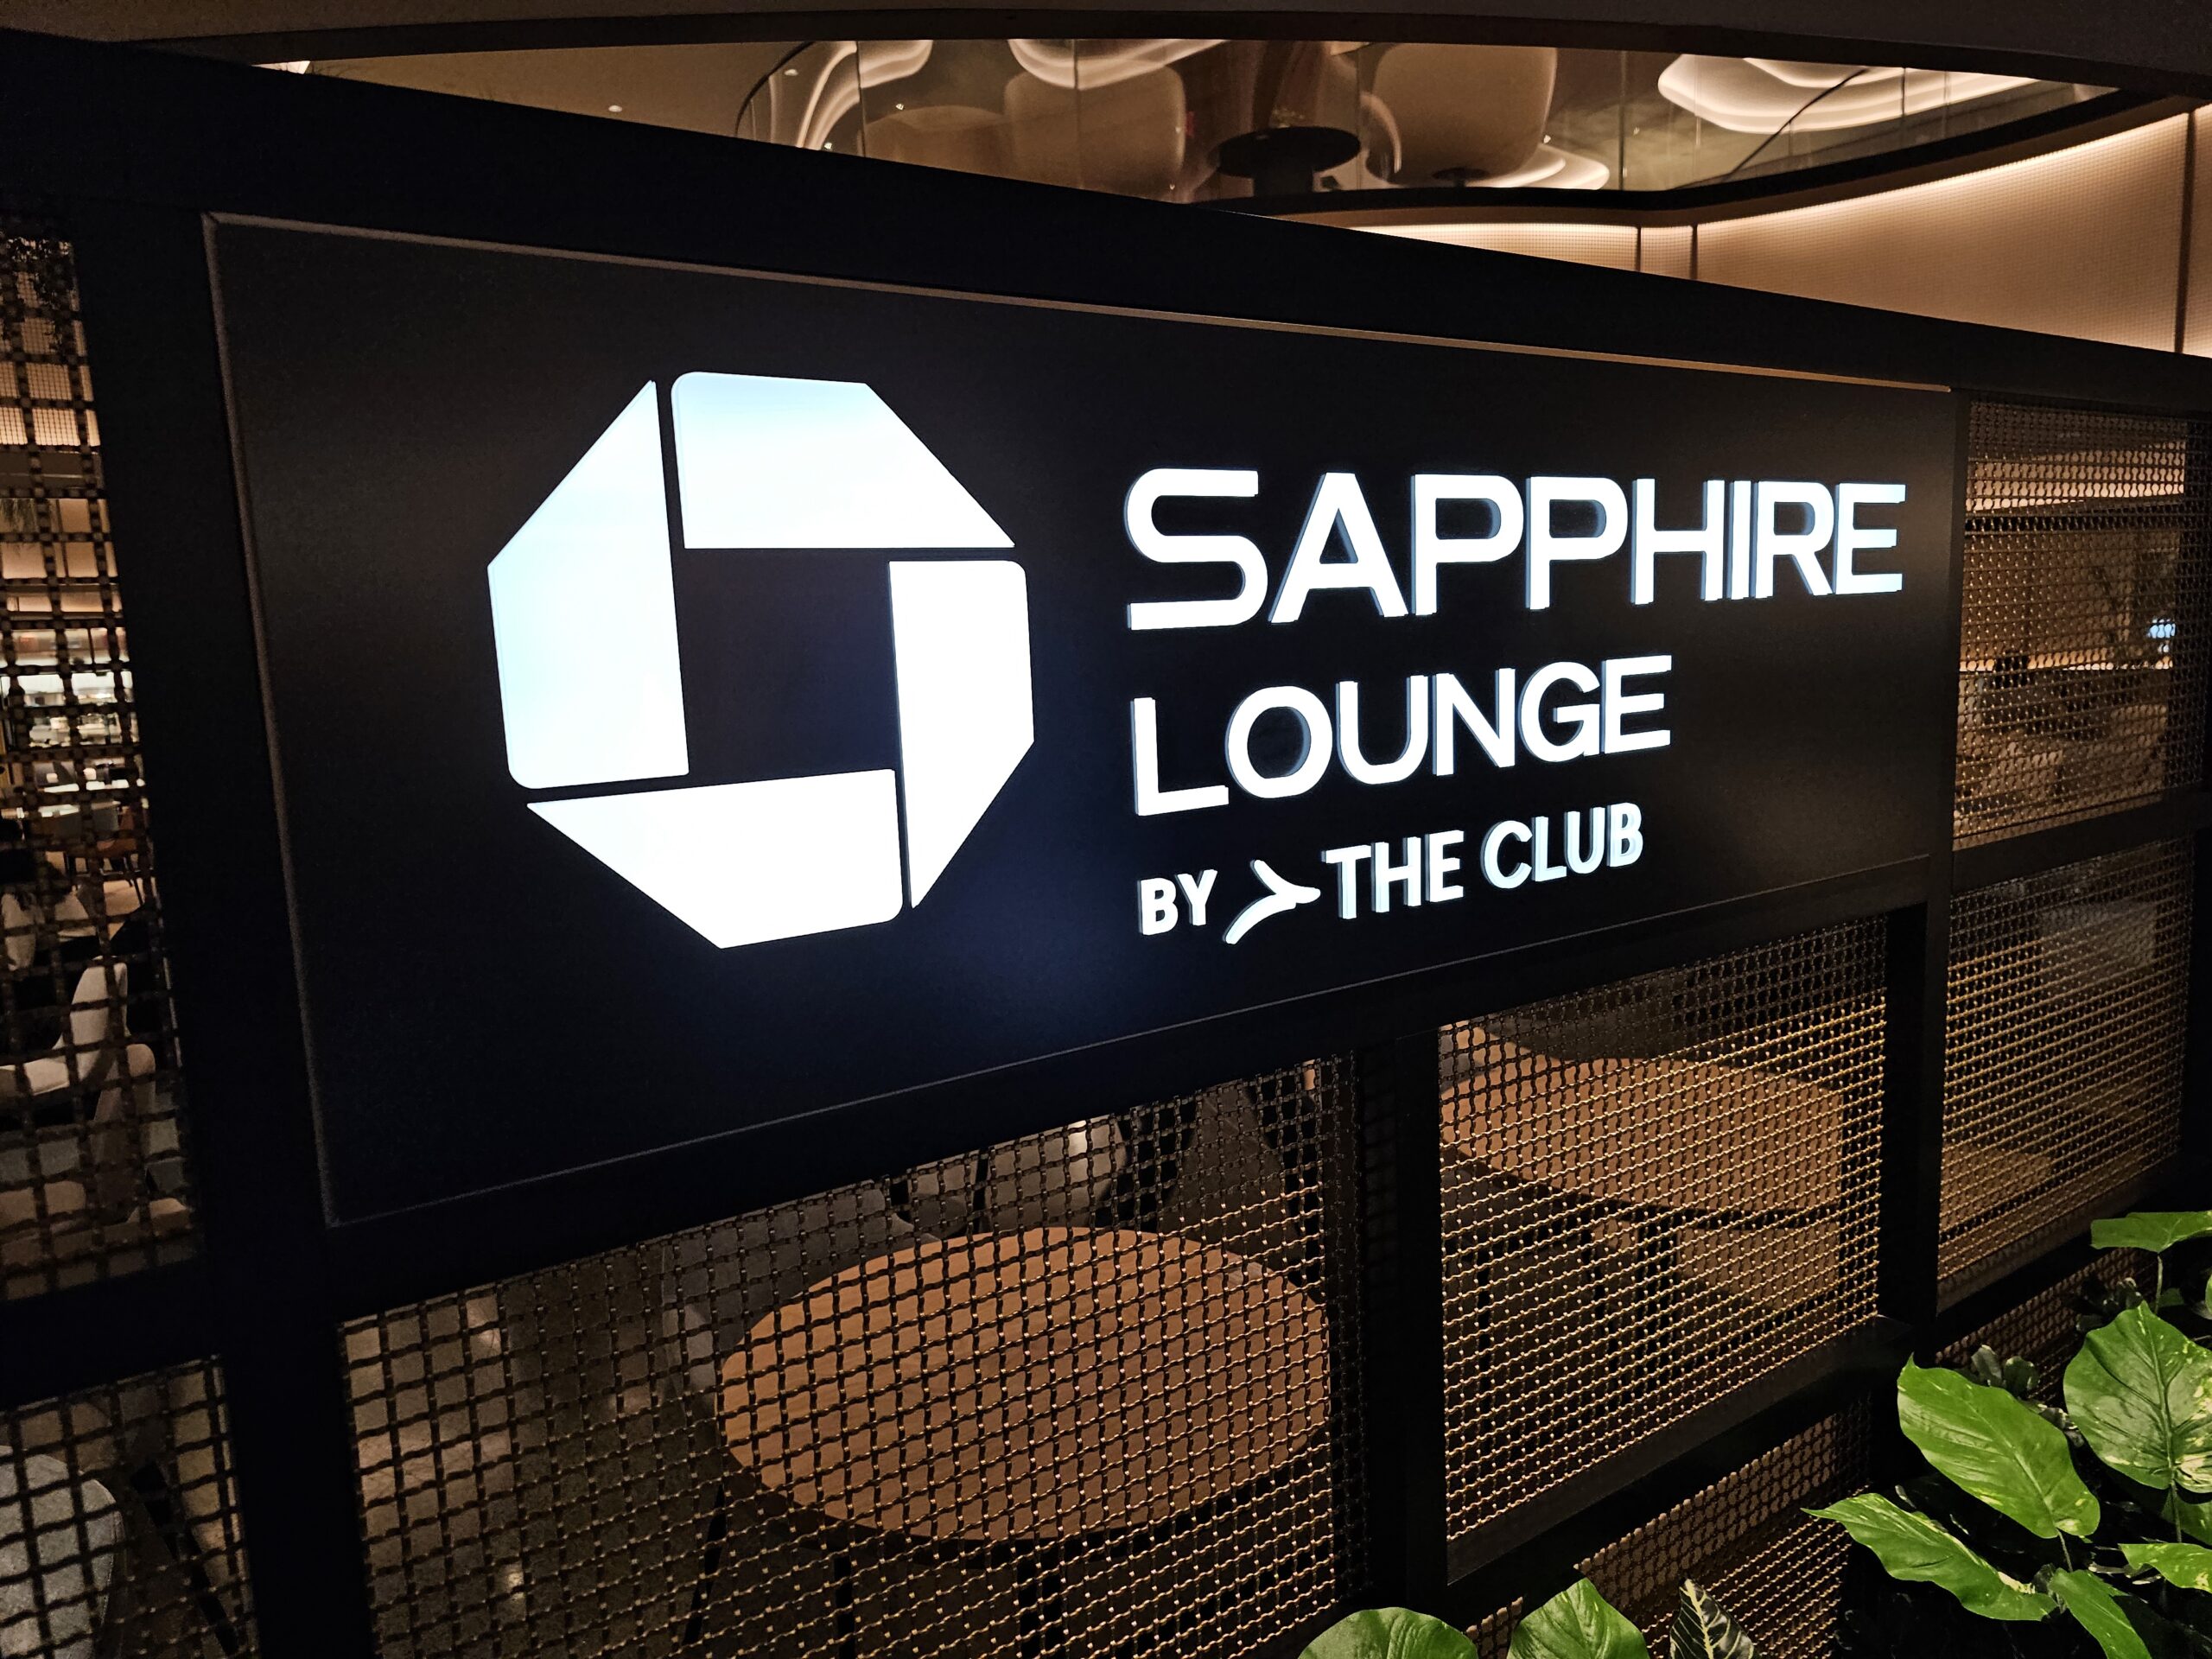 Chase Sapphire Lounge by The Club at LaGuardia Airport entrance